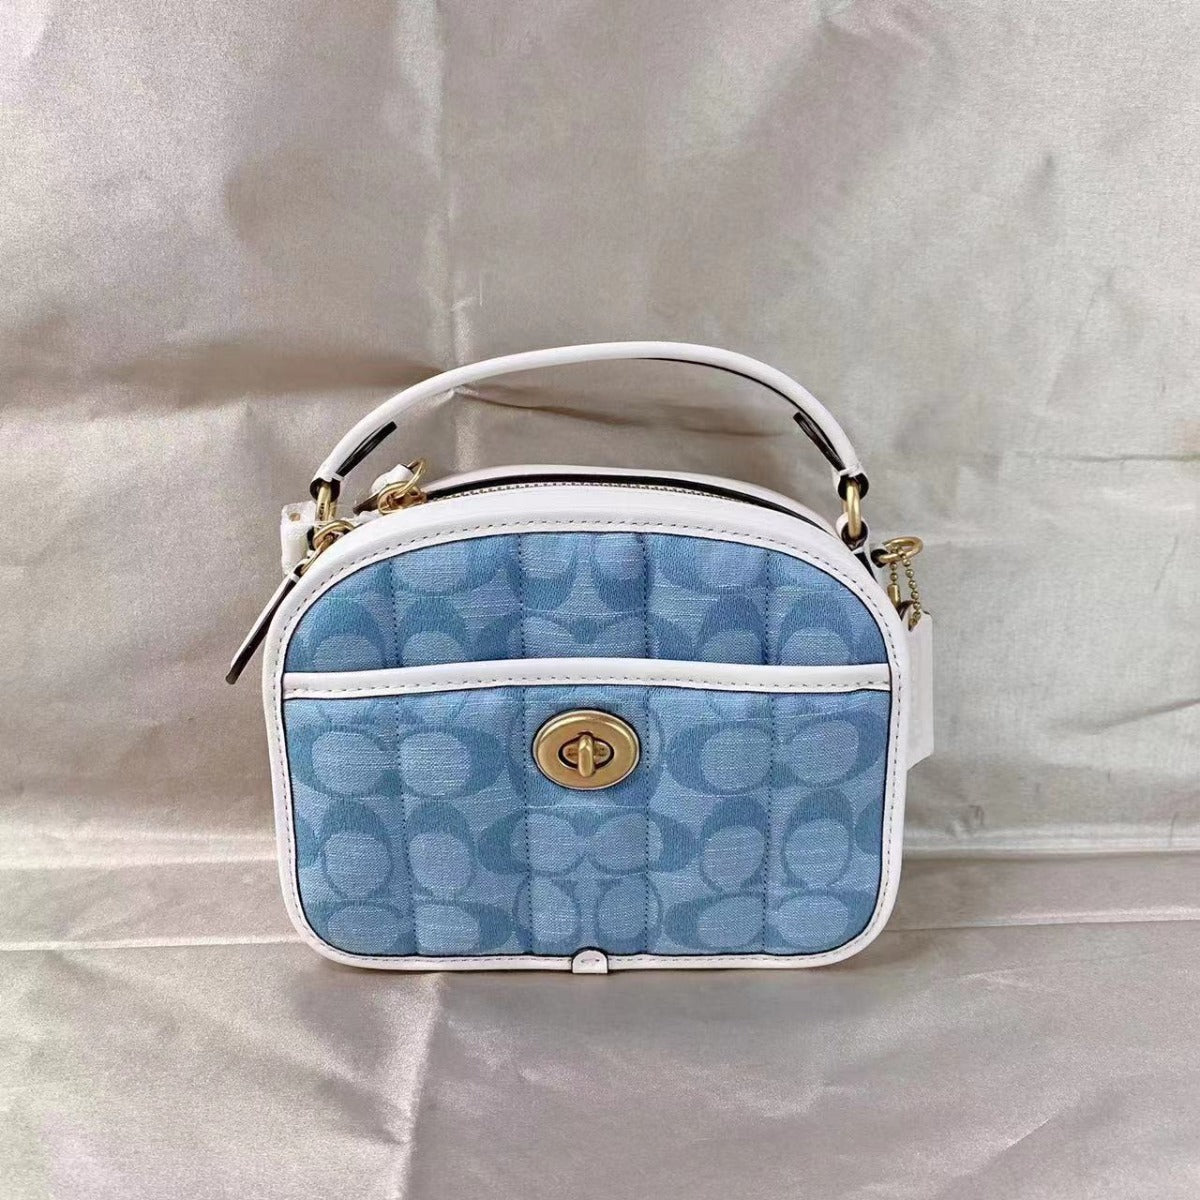 COACH C4688 LUNCHBOX TOP HANDLE IN SIGNATURE CHAMBRAY LIGHT WASHED DENIM CHALK